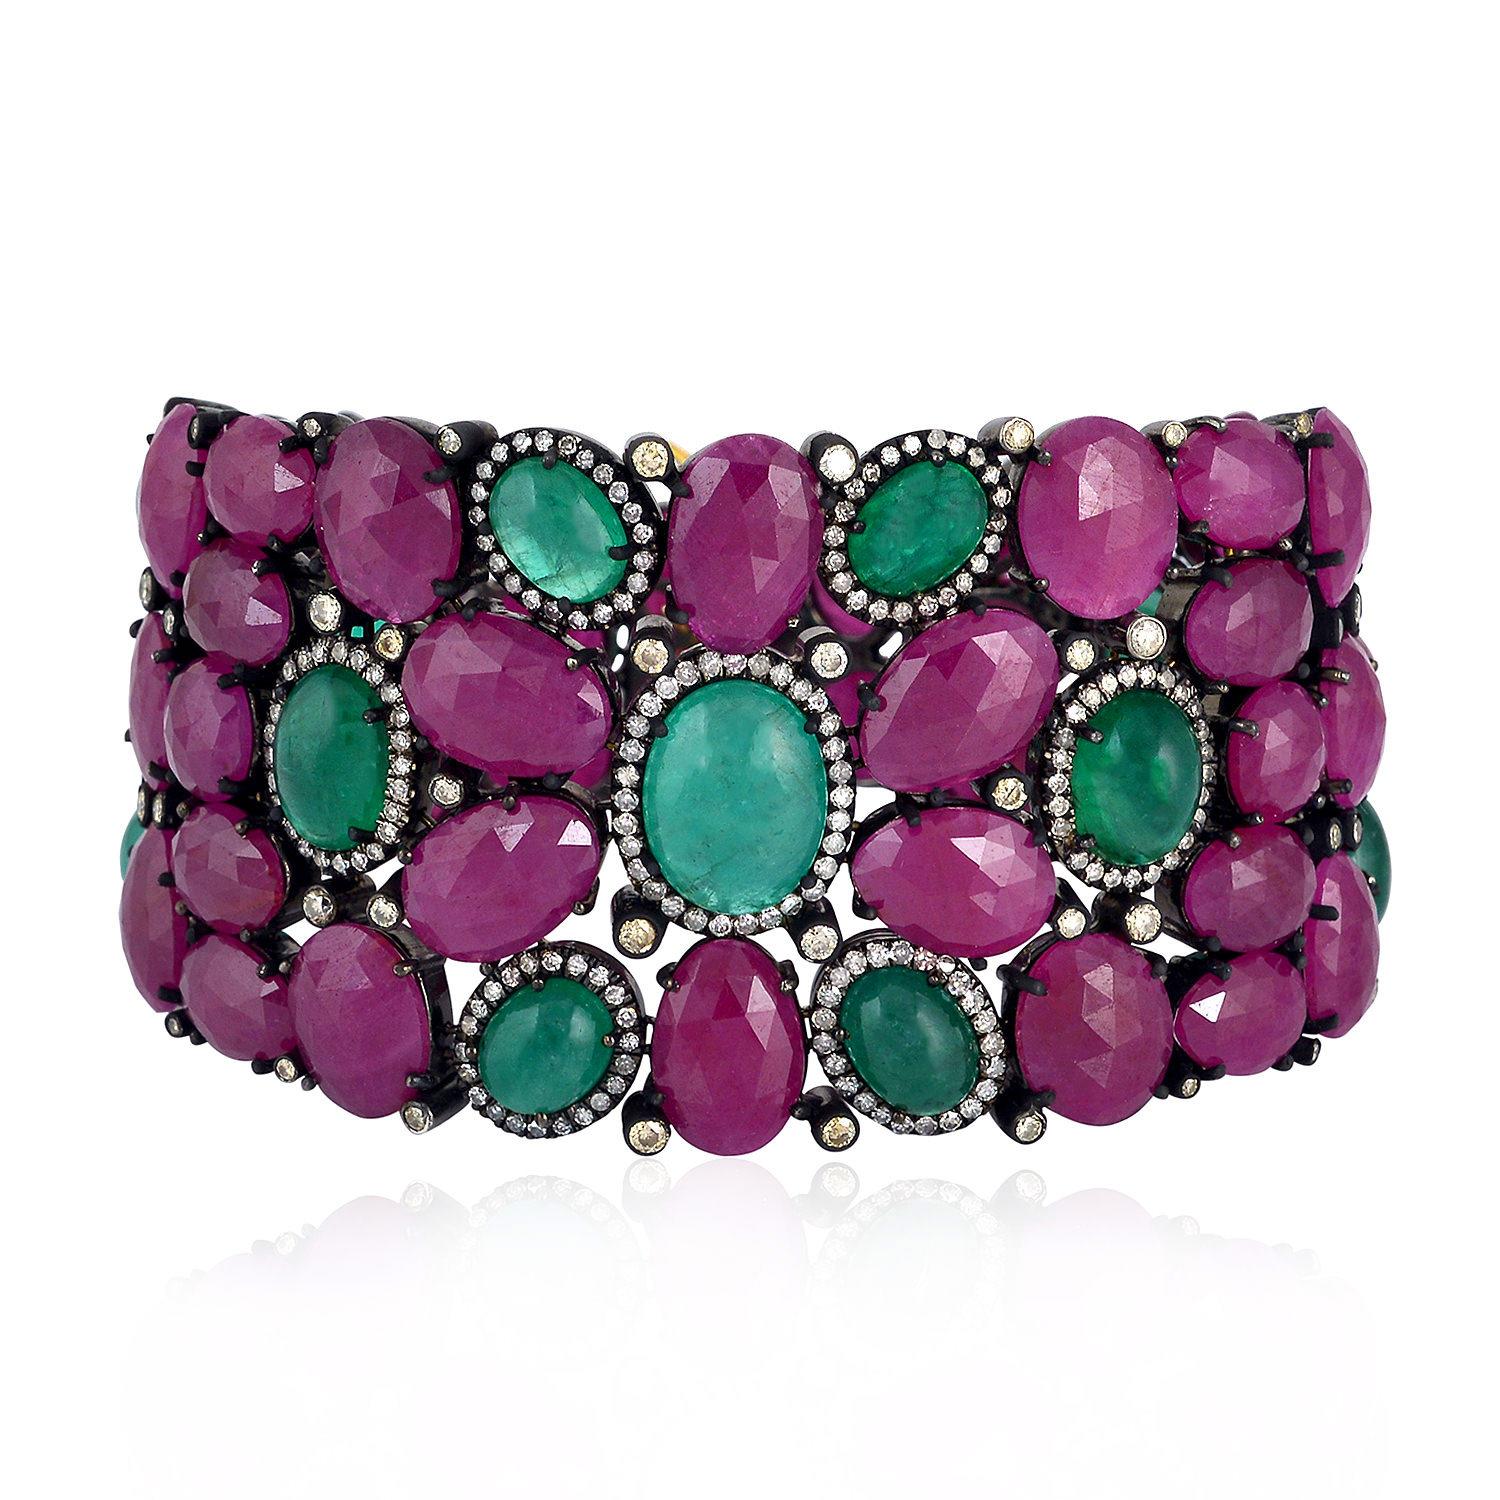 Baroque 139 Carats Natural Ruby Emerald & Diamond Bracelet 18k Gold & Silver For Sale 2